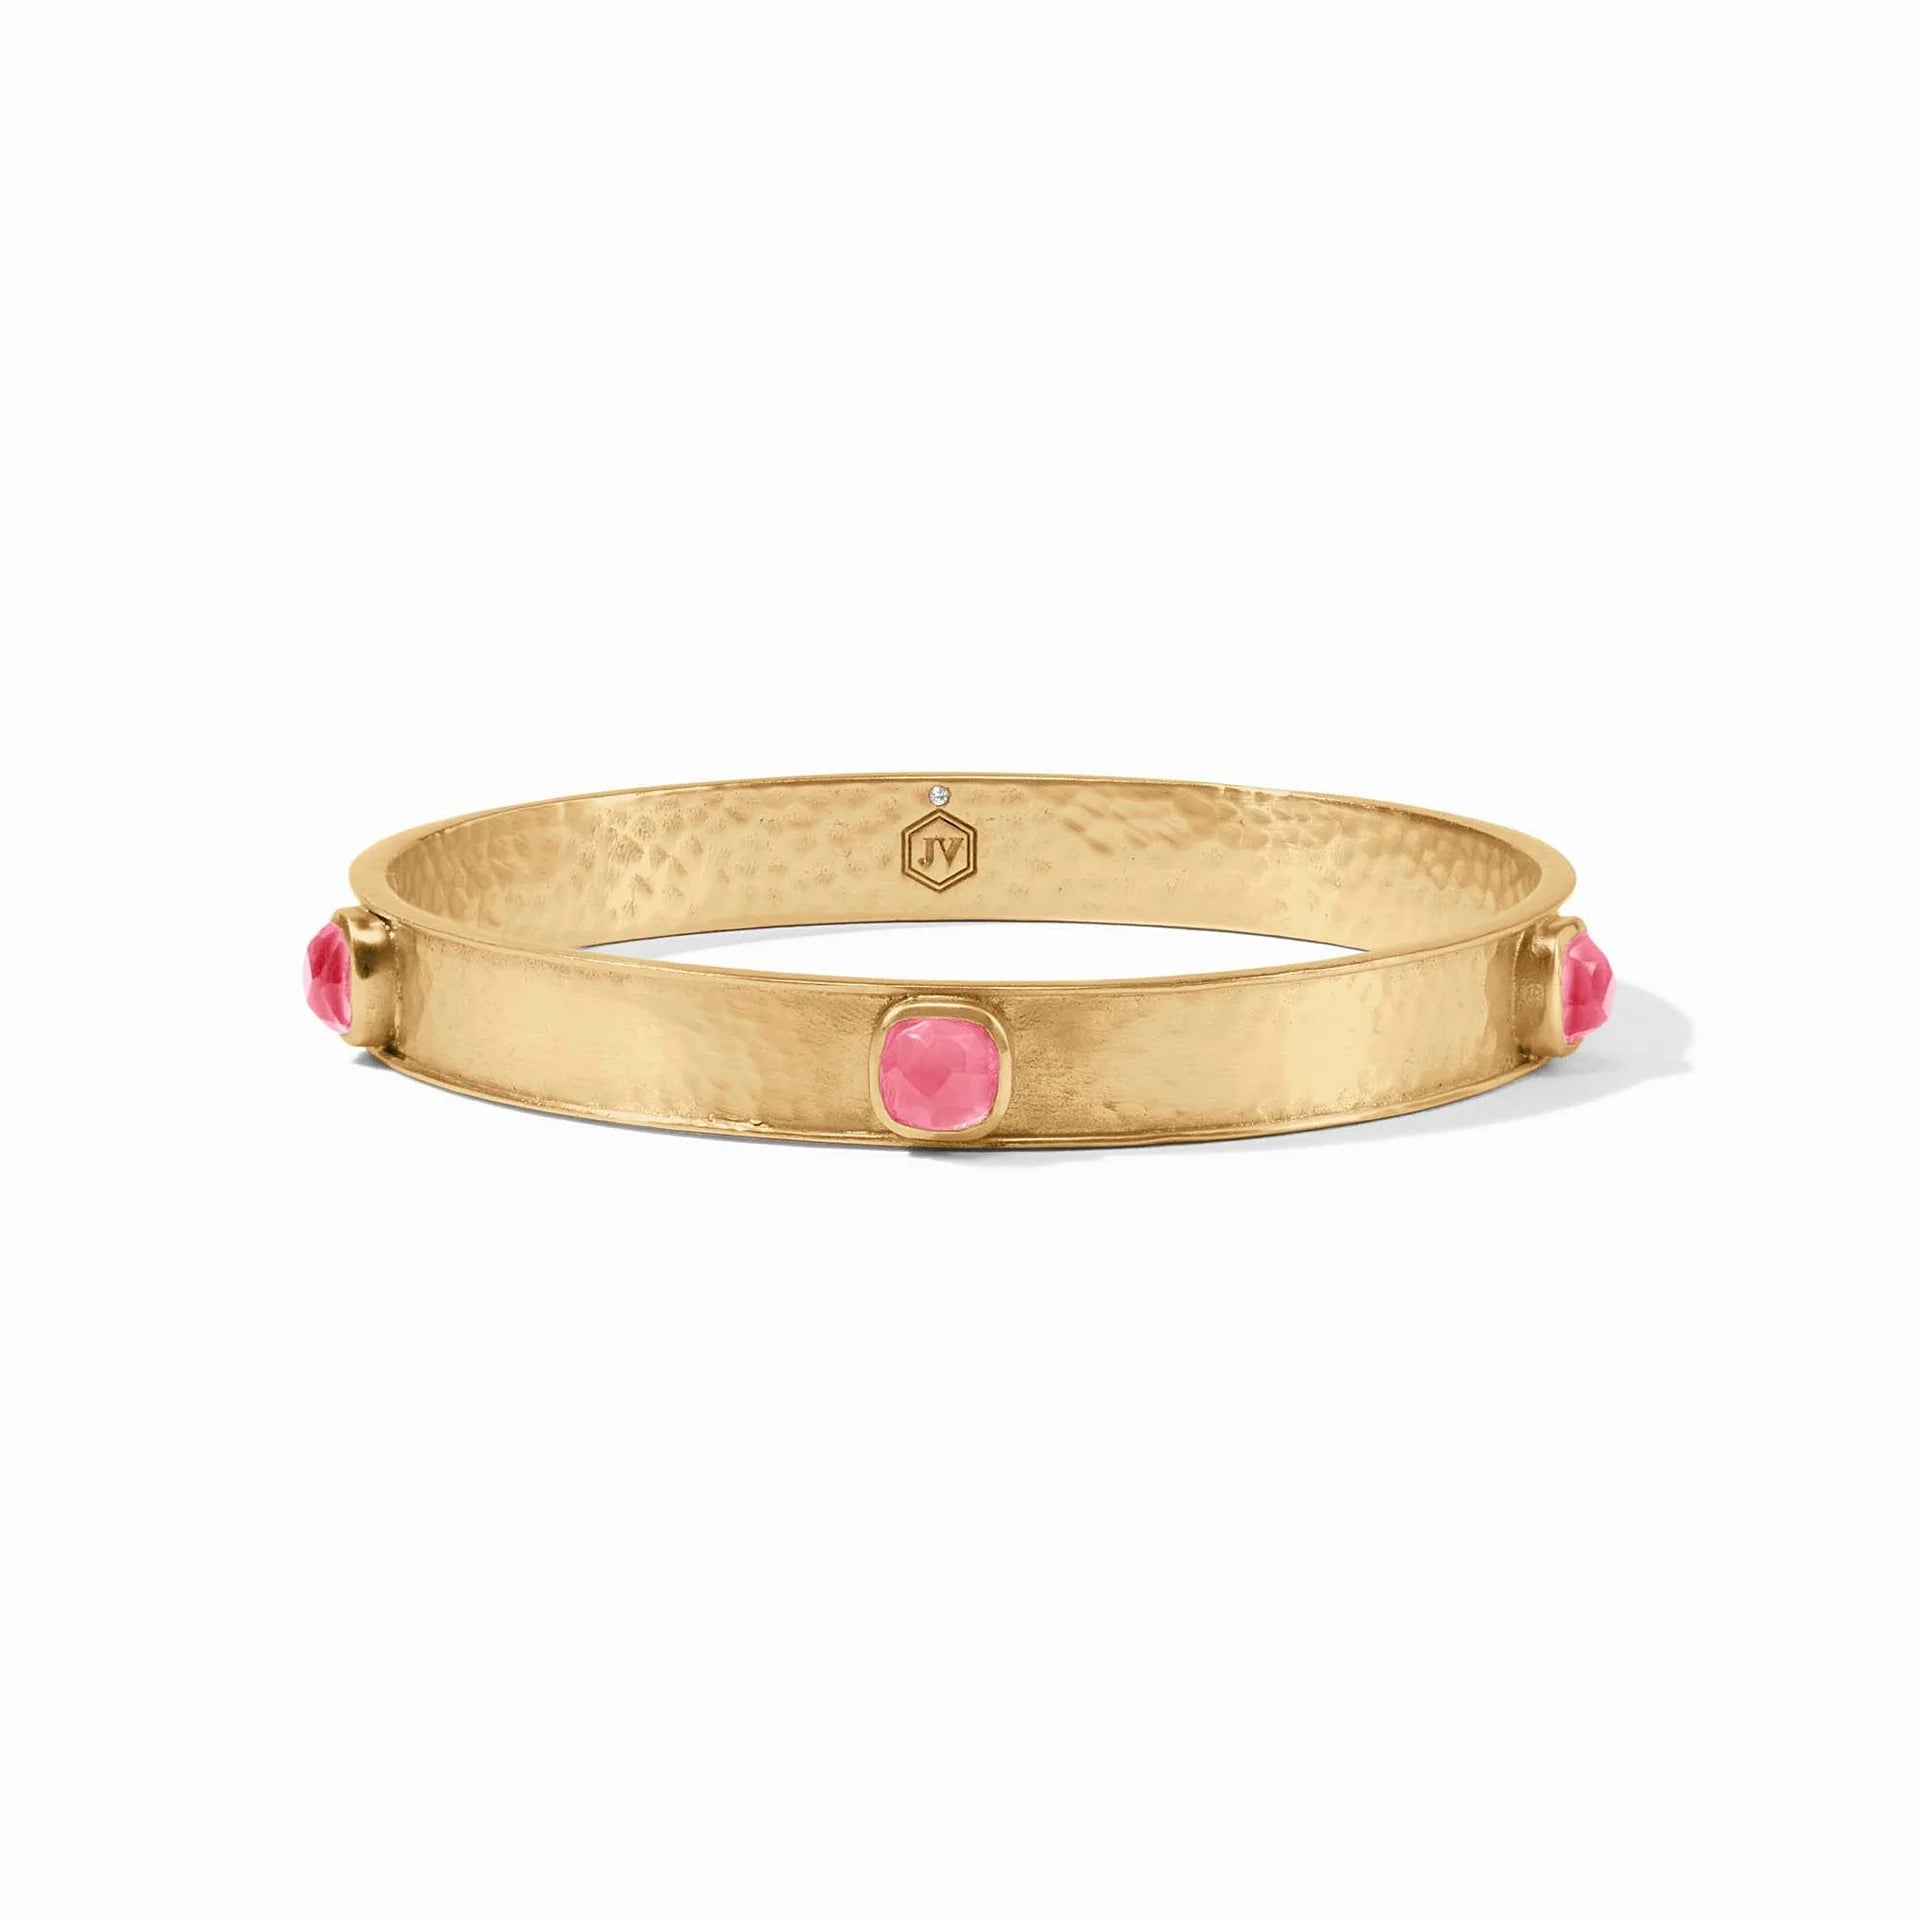 Julie Vos | Catalina Stone Bangle with Iridescent Peony Pink Stones in Gold - Giddy Up Glamour Boutique